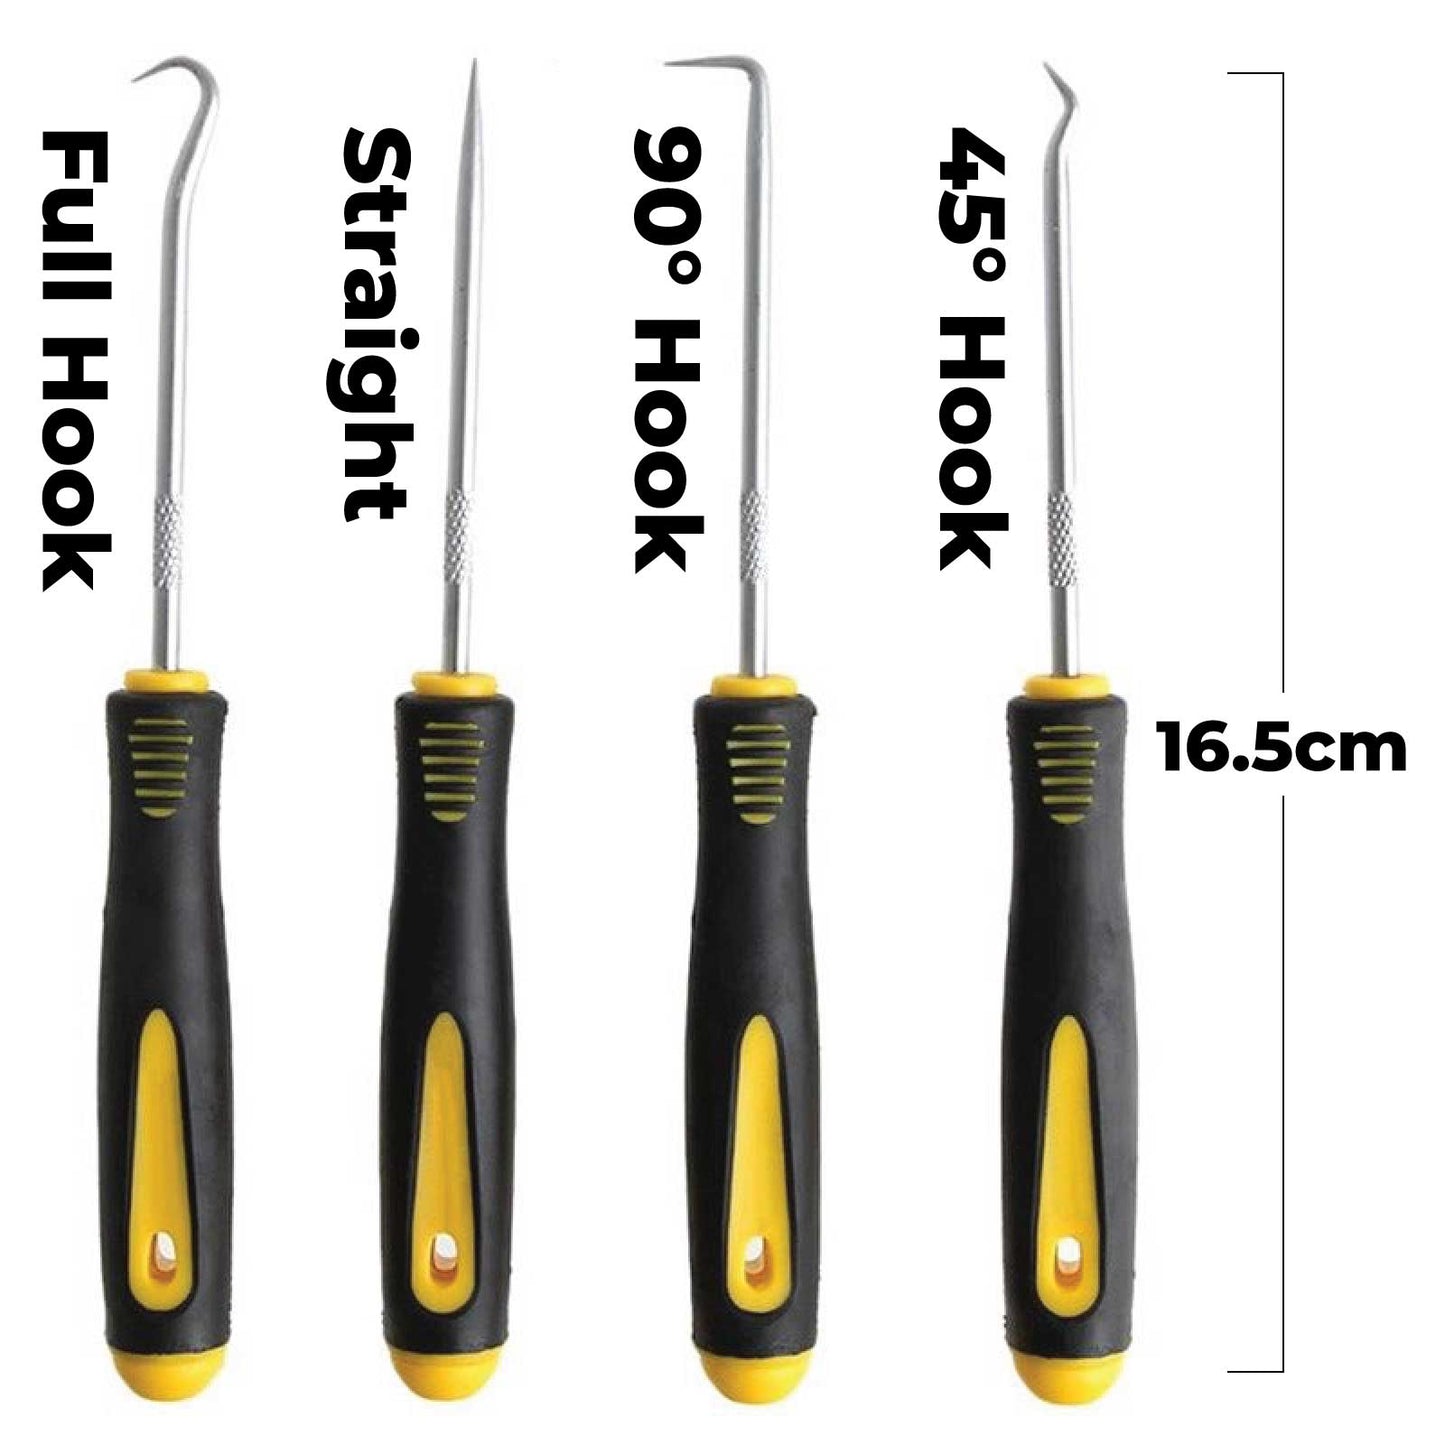 4 piece O-Ring Hook and Pick Tool Set - 165mm Long - Totally Seals®